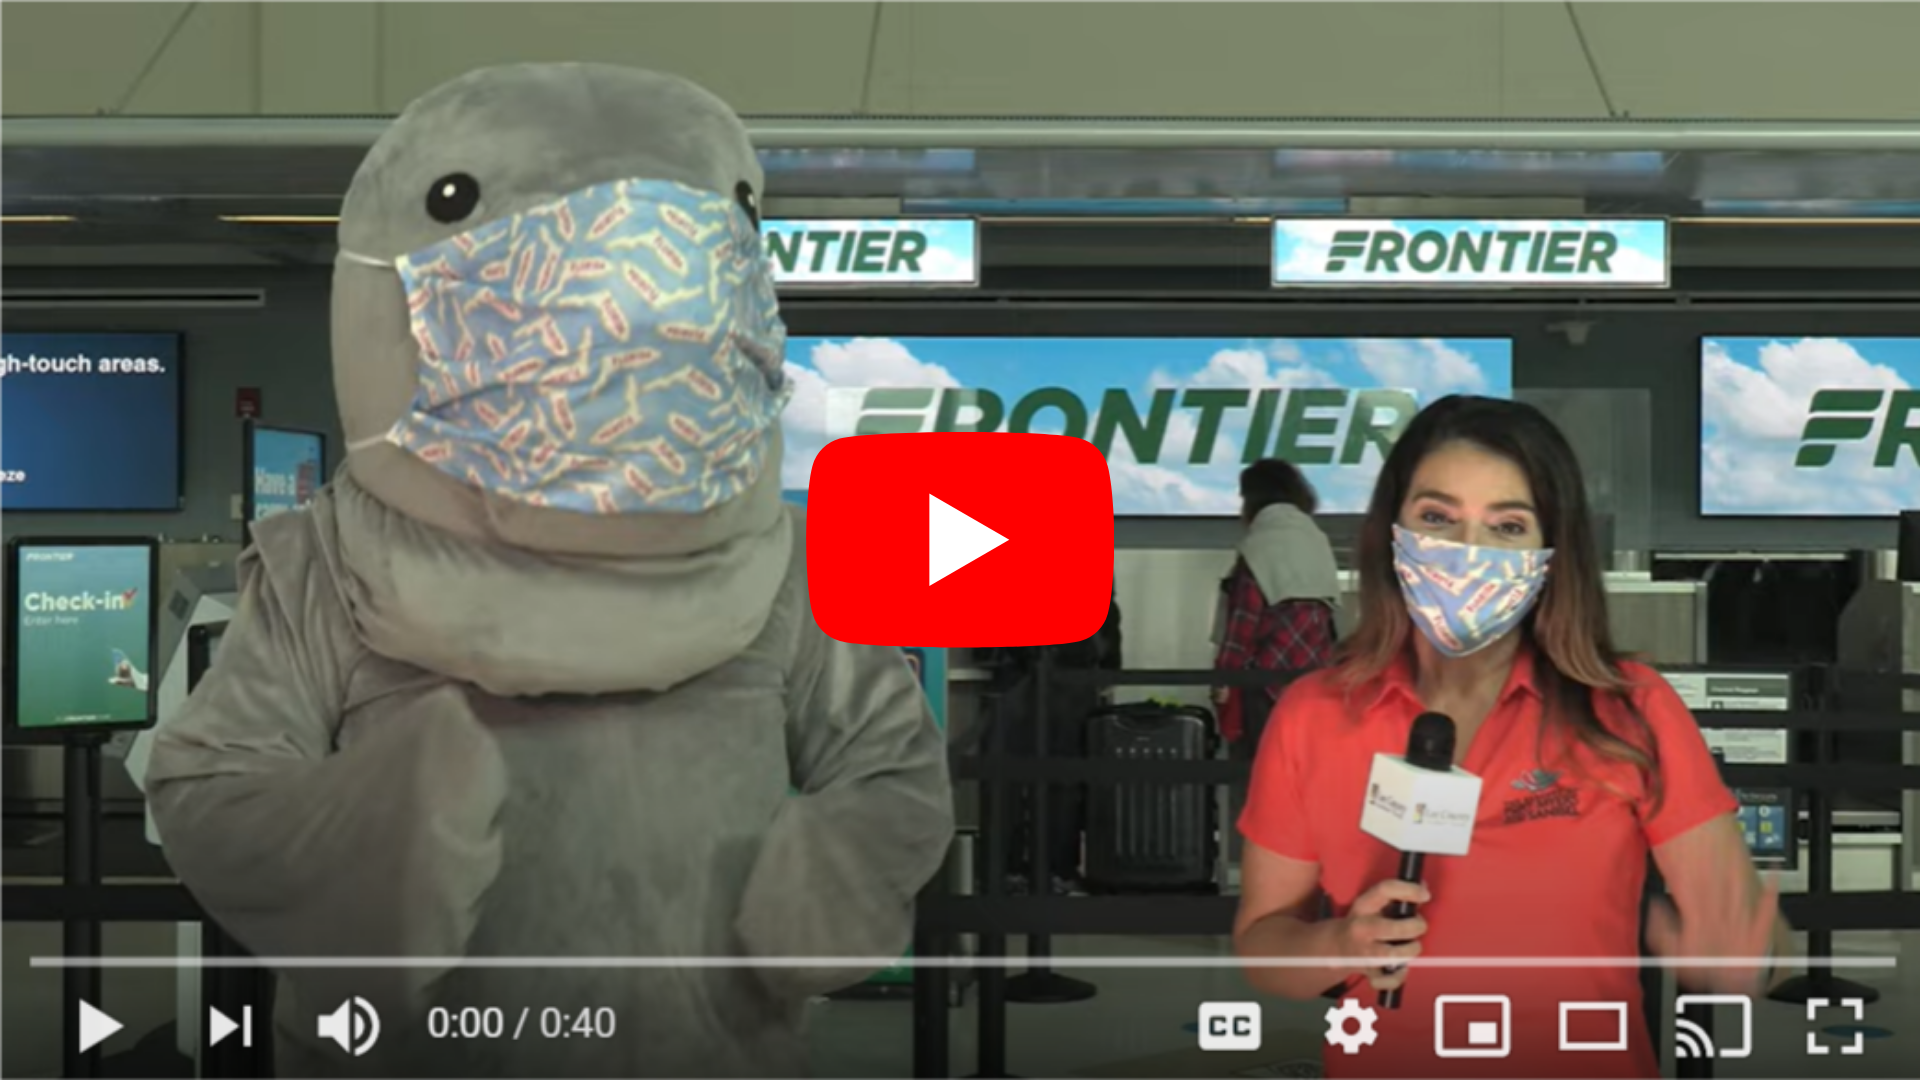 Fort Myers wins Frontier Airlines warm weather getaway contest